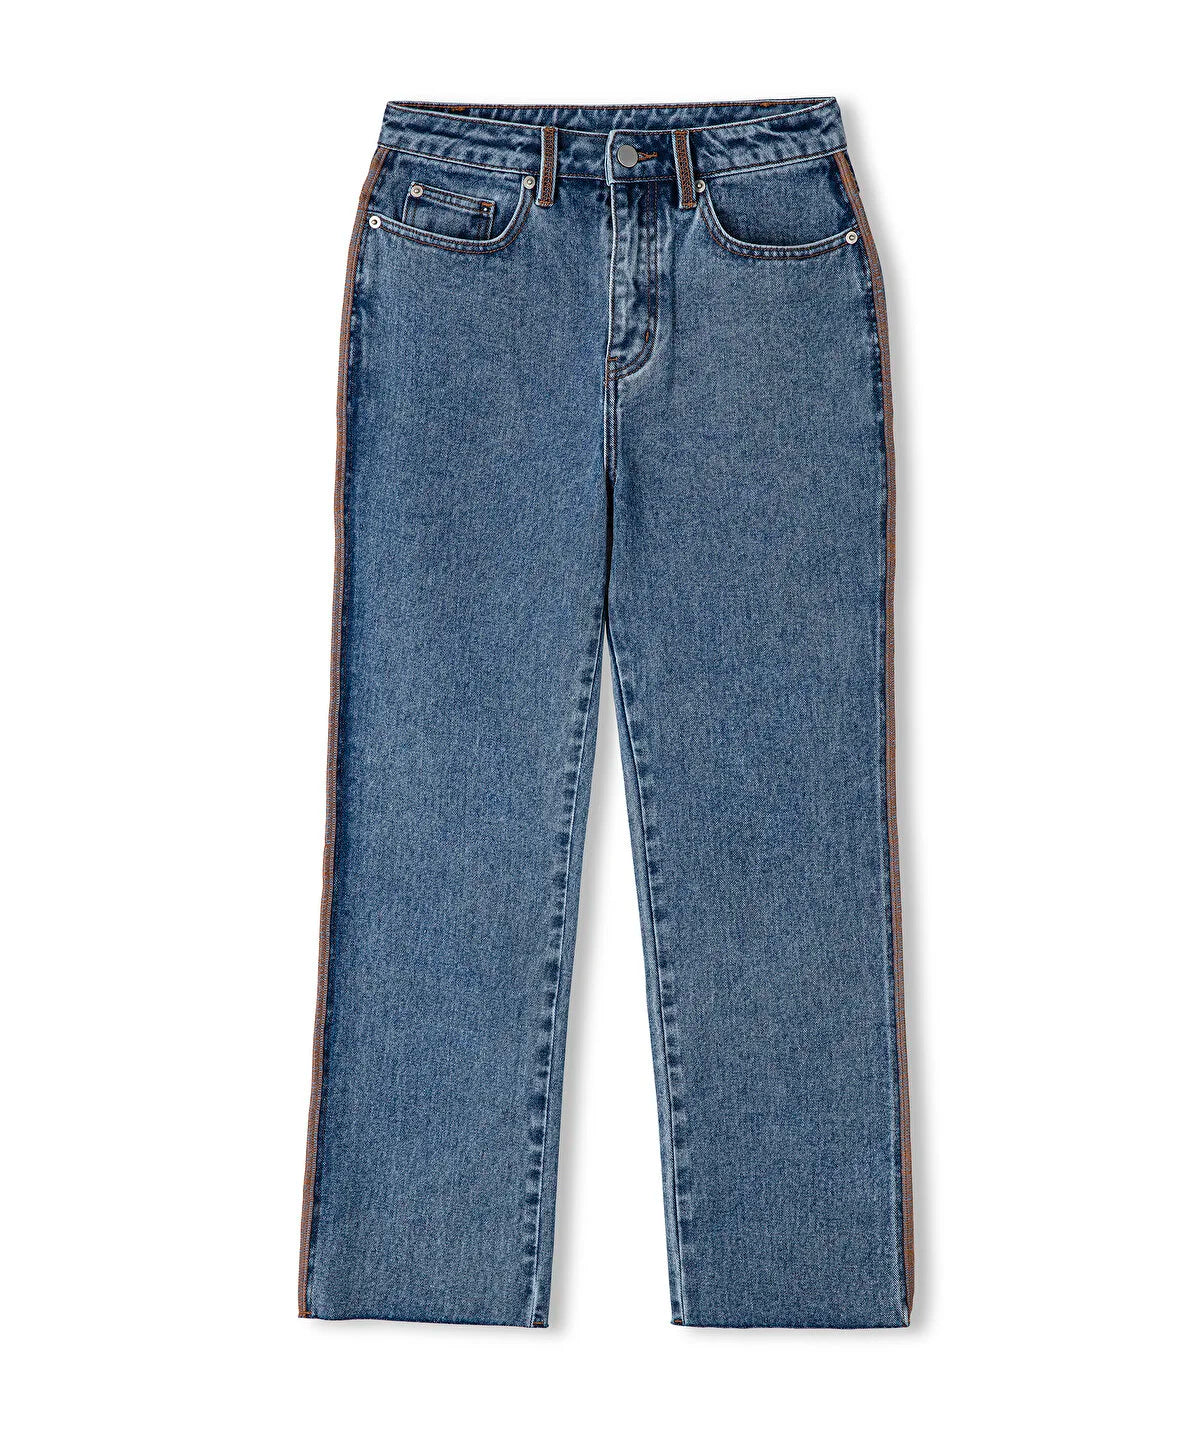 RAW EDGE DETAILED JEANS